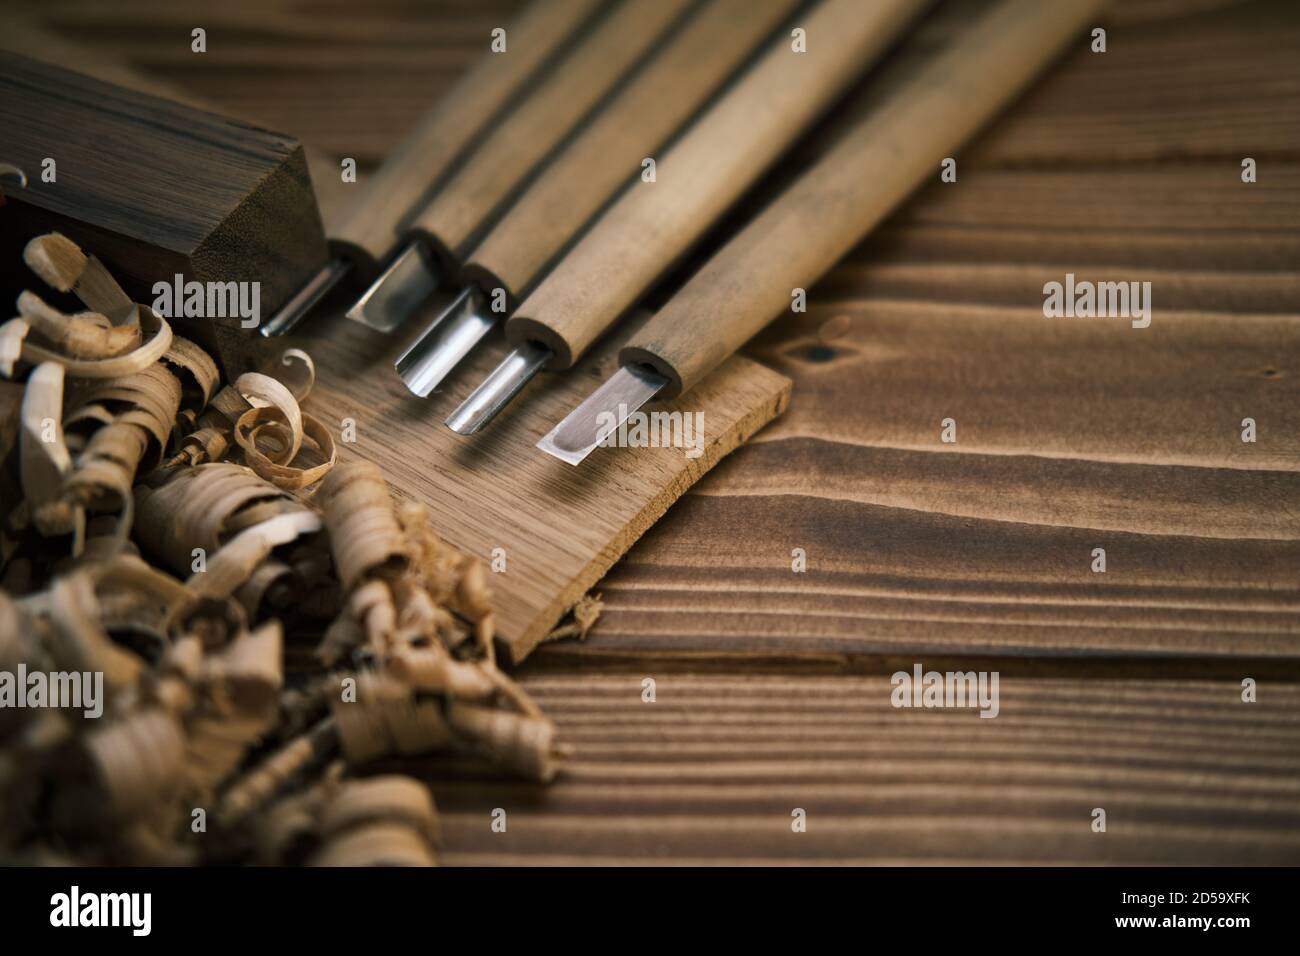 Close up view of a set of wood chisels for carving wood, sculpture tools on wooden background Stock Photo